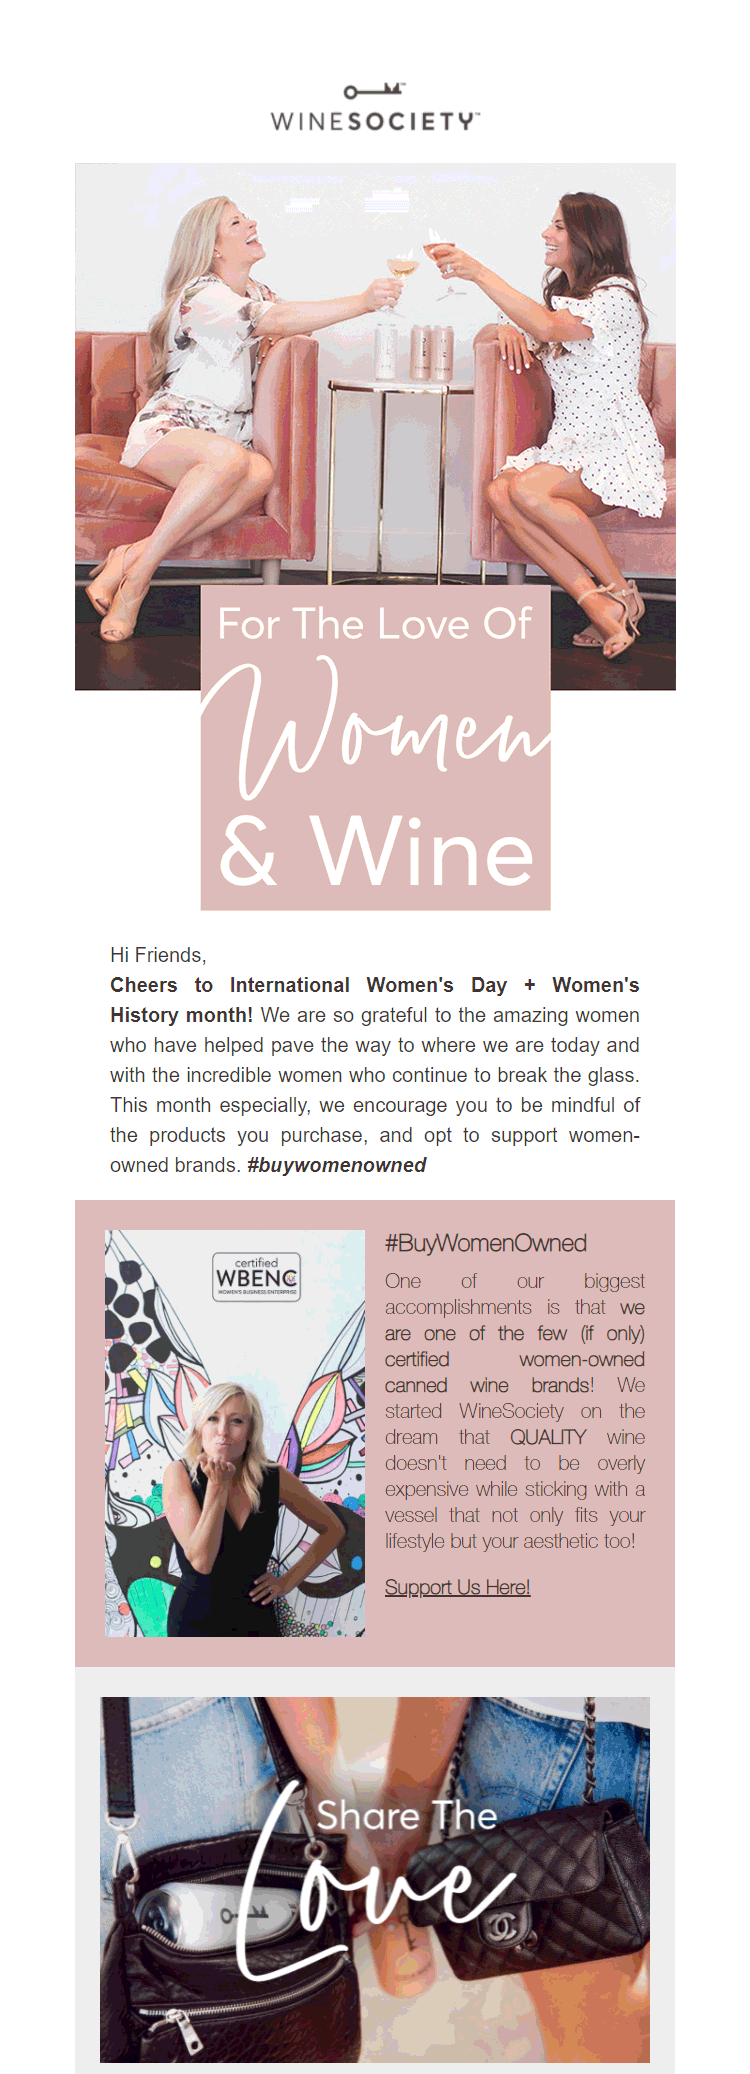 WineSociety - Women’s Day  Email Inspiration